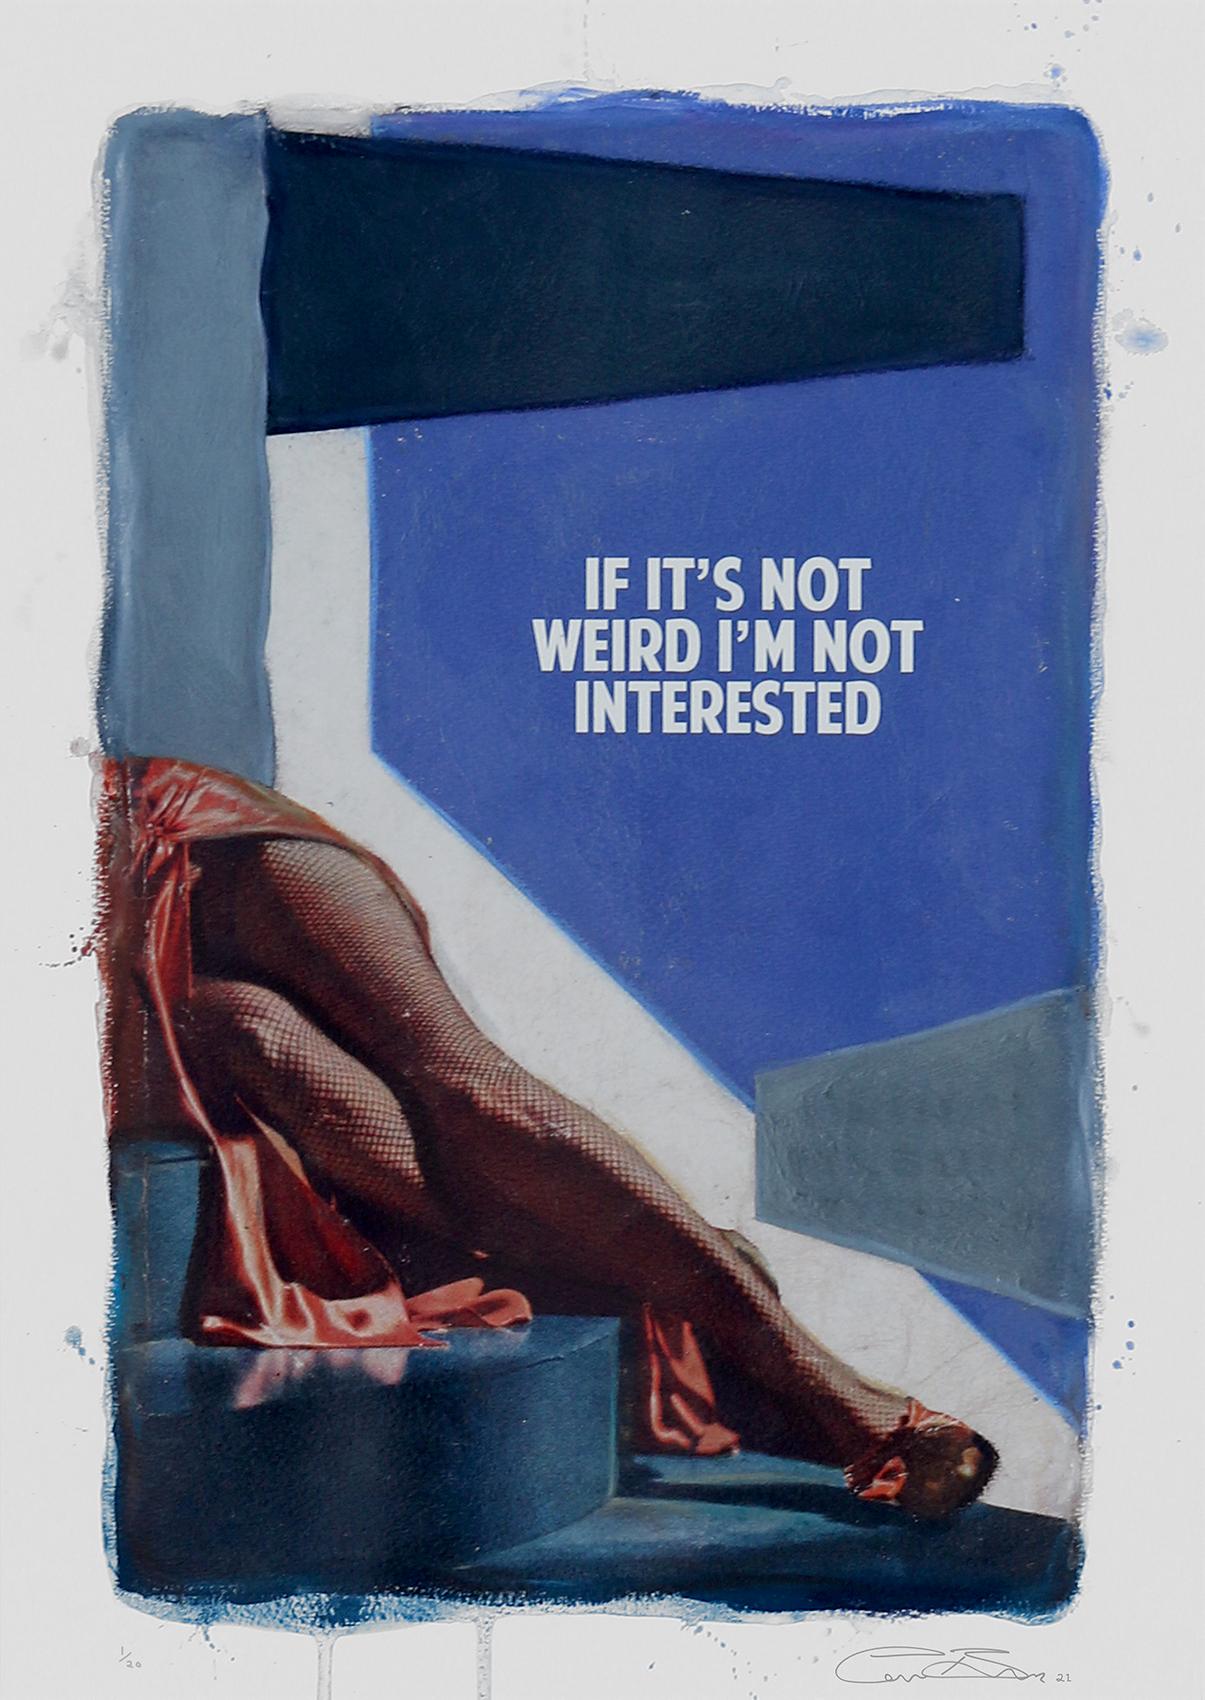 IF IT'S NOT WEIRD - Par les artistes londoniens The Connor Brothers - Print de The Connor Brothers 